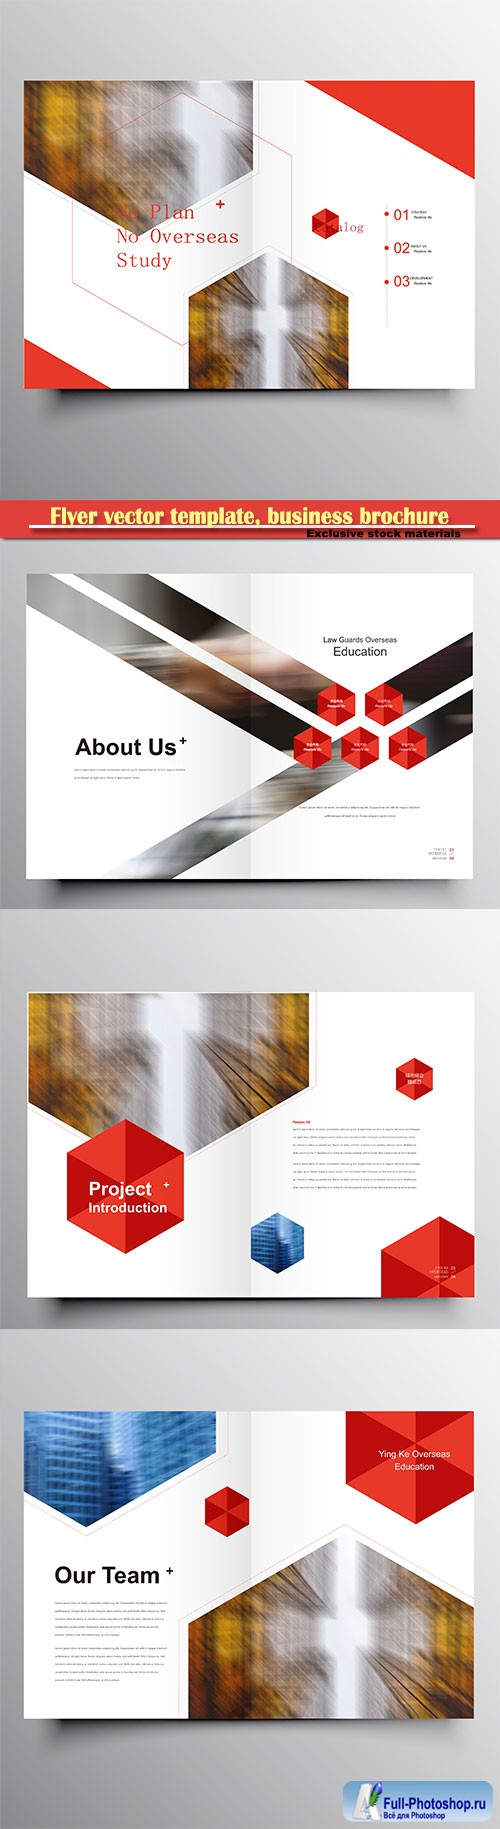 Flyer vector template, business brochure, magazine cover # 34